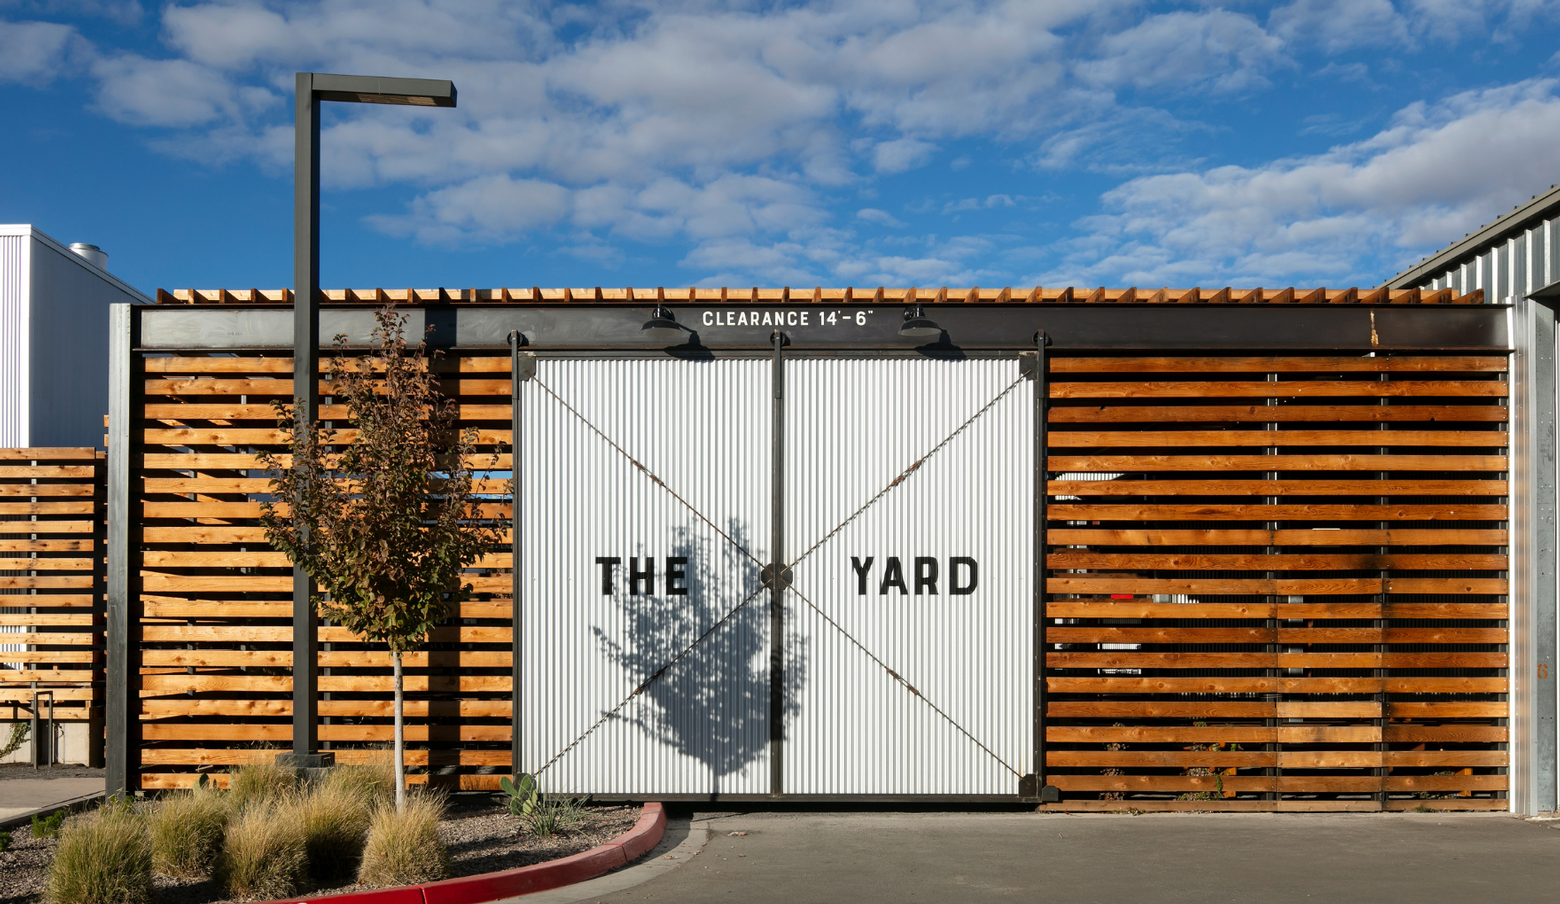 The Yard Event Space